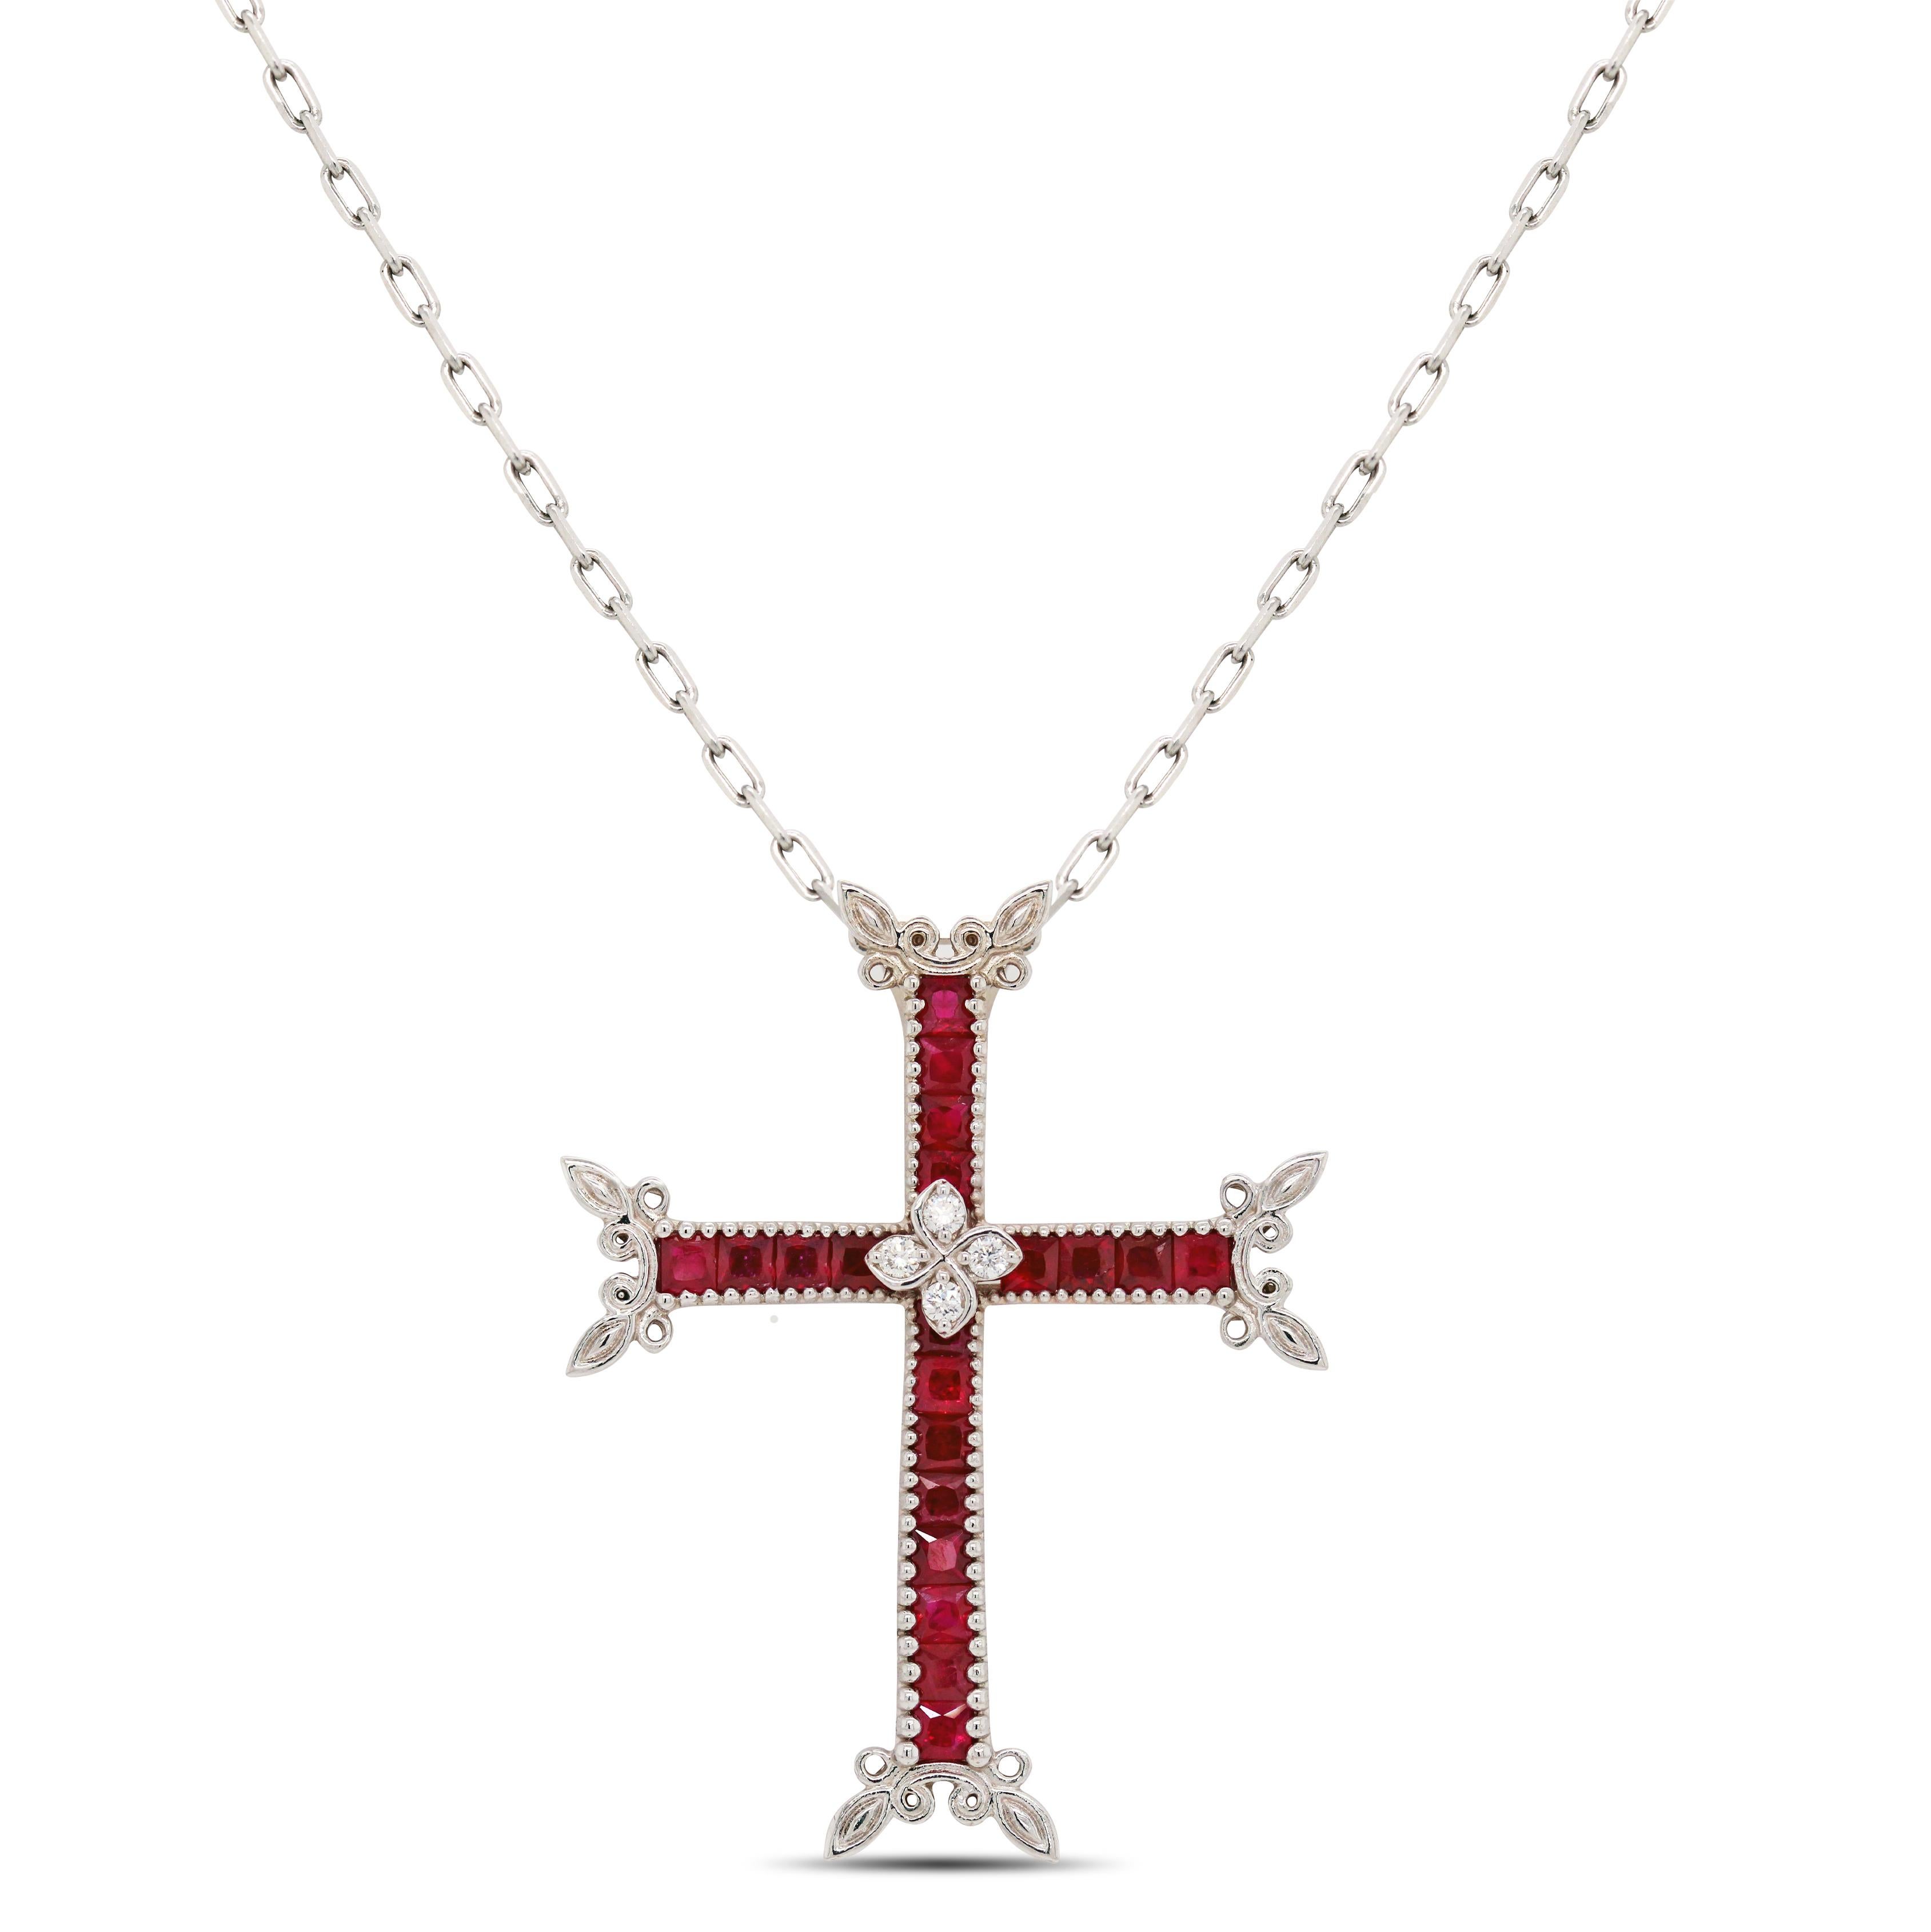 Stambolian 18K White Gold Diamond Princess Cut Ruby Cross Pendant Necklace

This unique take on a cross is inspired by the Armenian cross with the floral corners

2.50 carat Rubys total weight. Rubys are all princess cut.

Diamonds are set in the